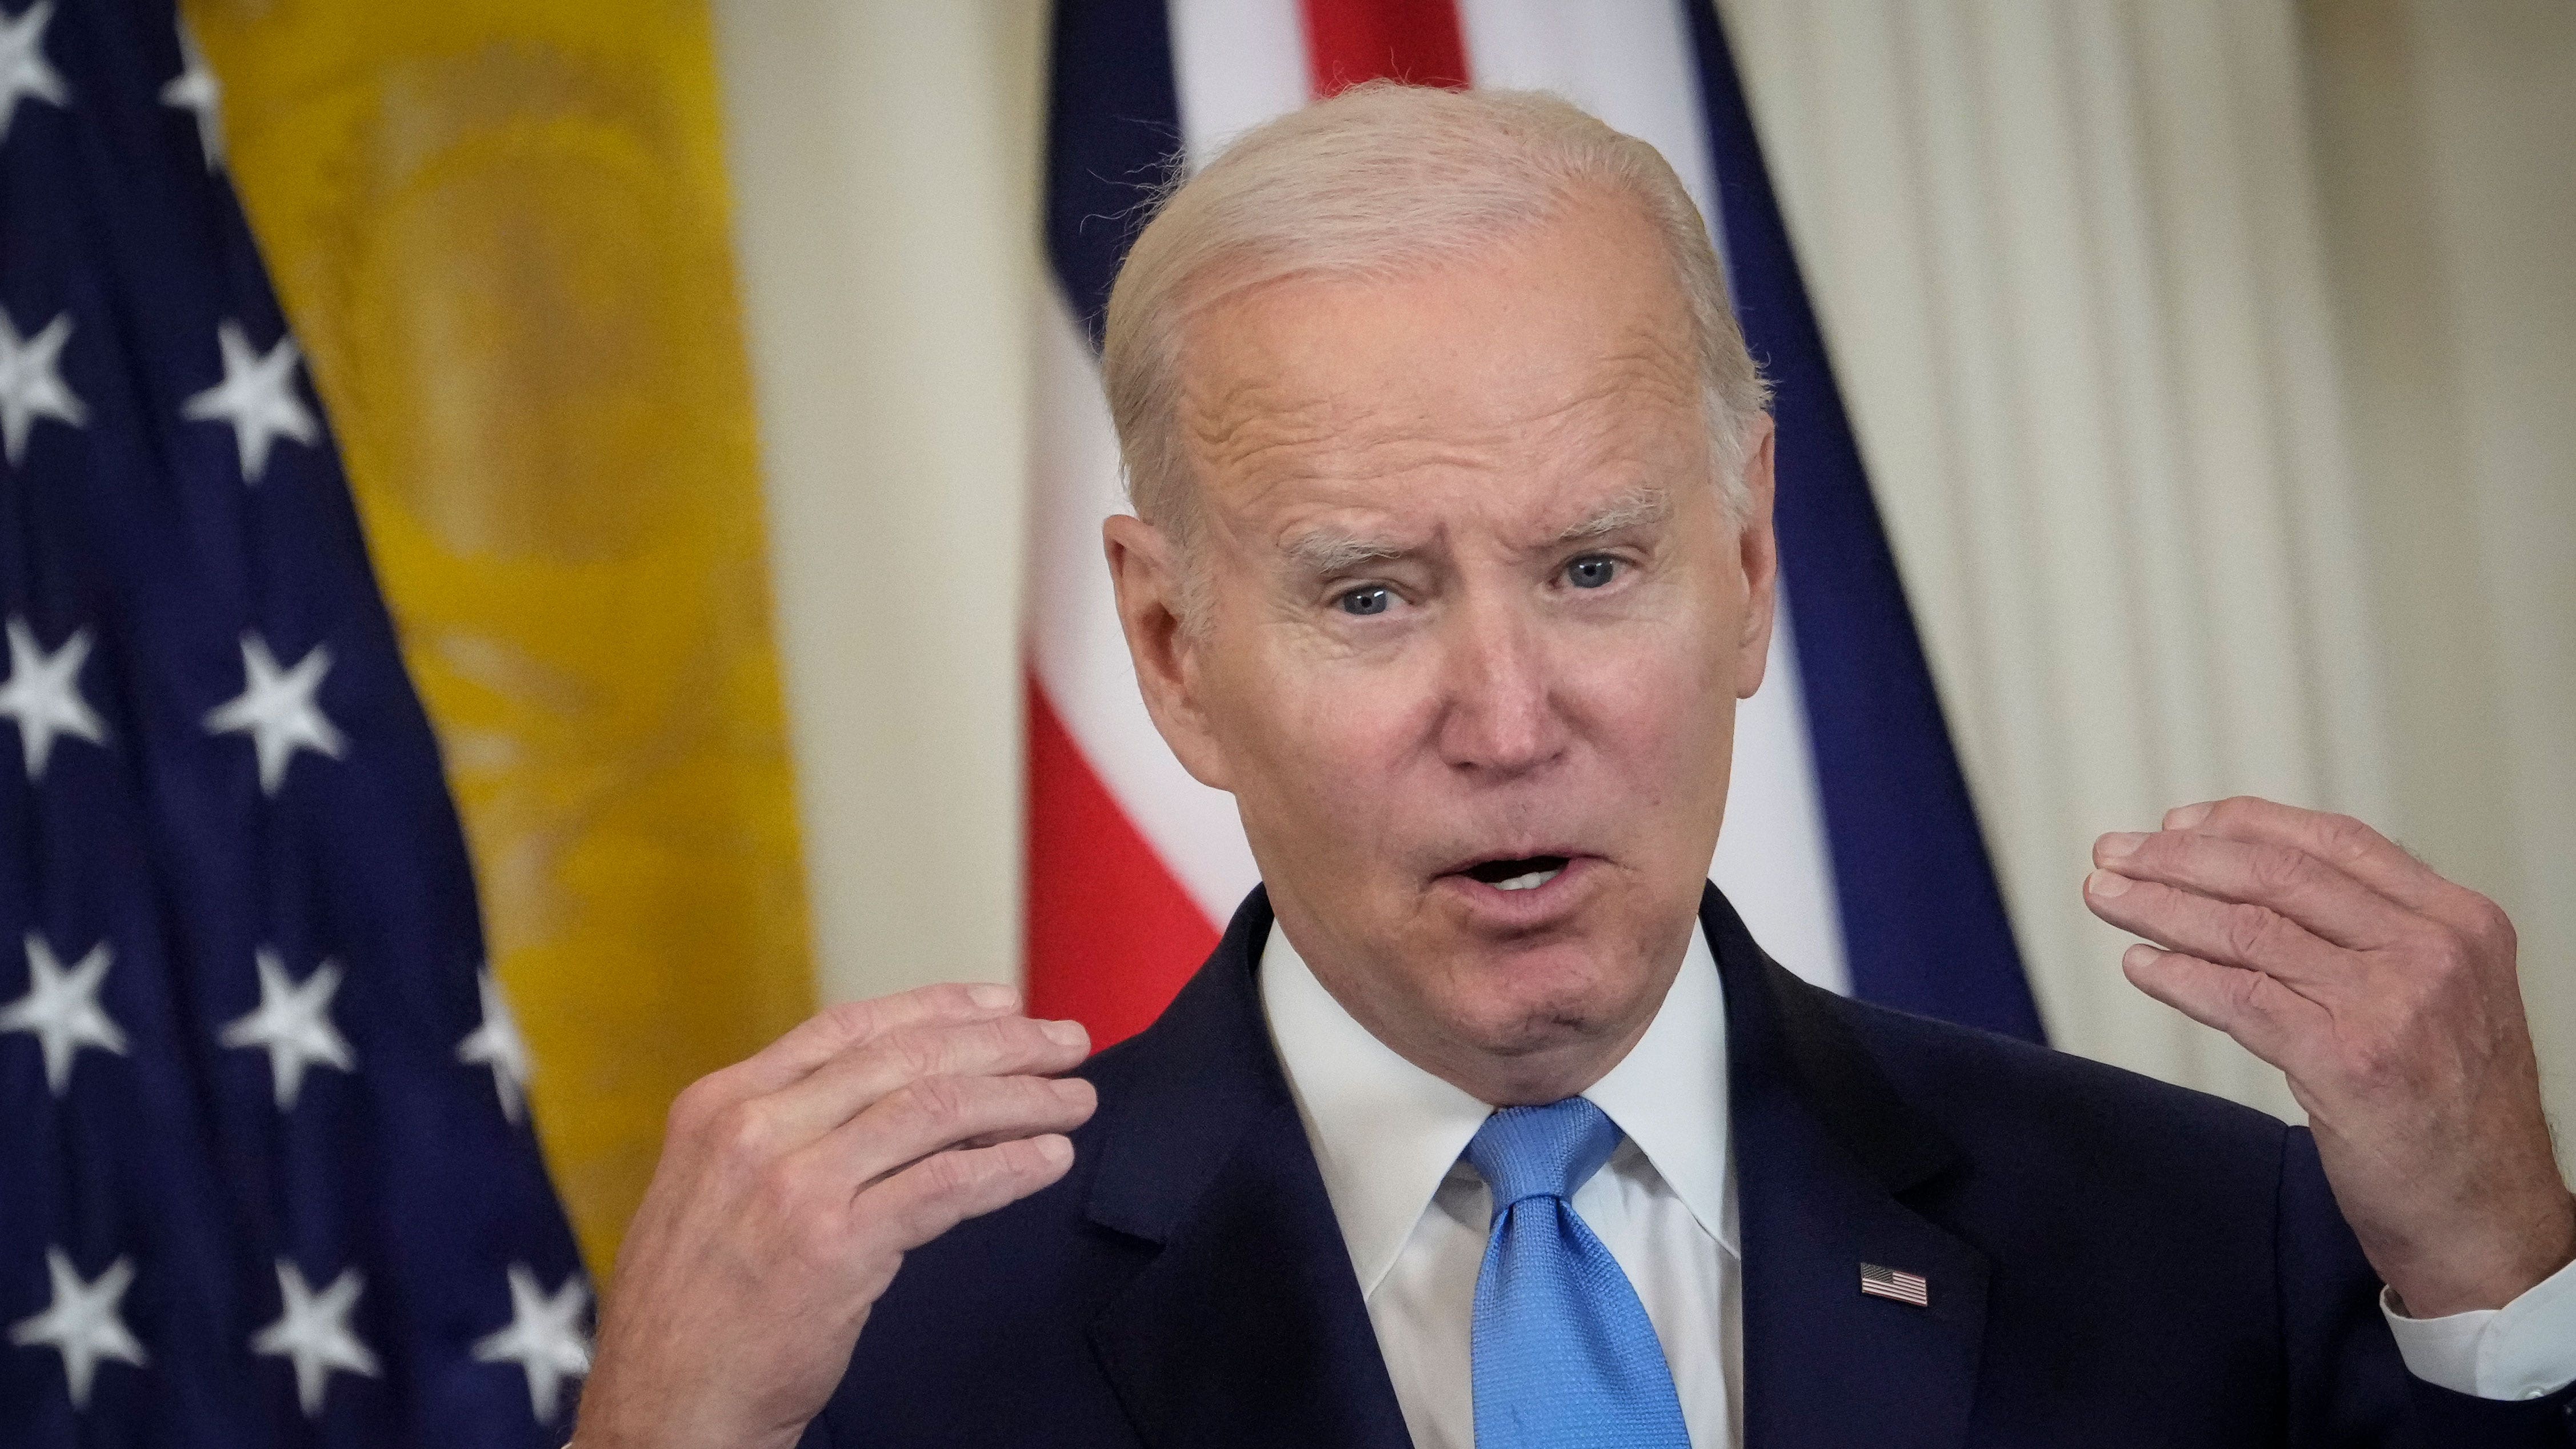 WATCH: Biden responds to bribery scandal allegations with joke: 'Where's the money?'